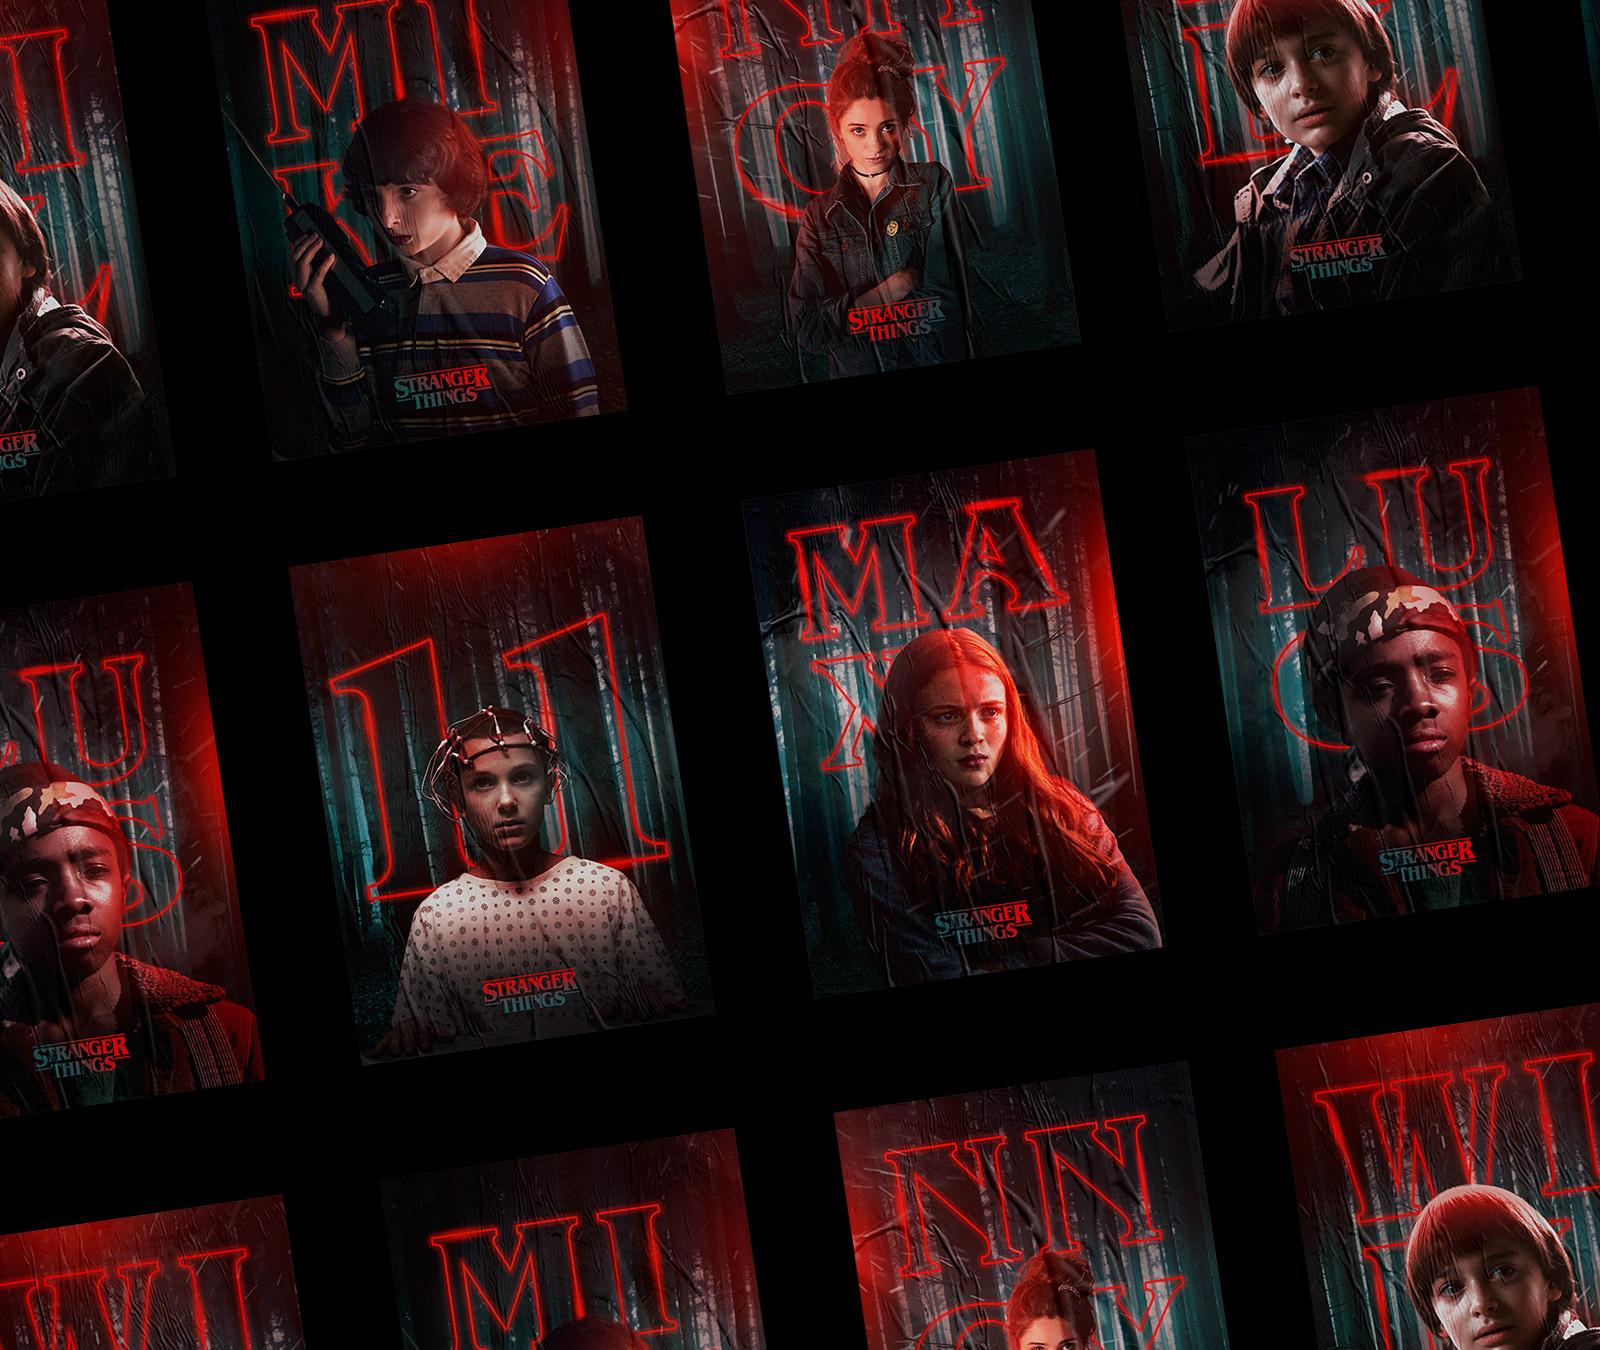 Spooky Stranger Things Characters Posters